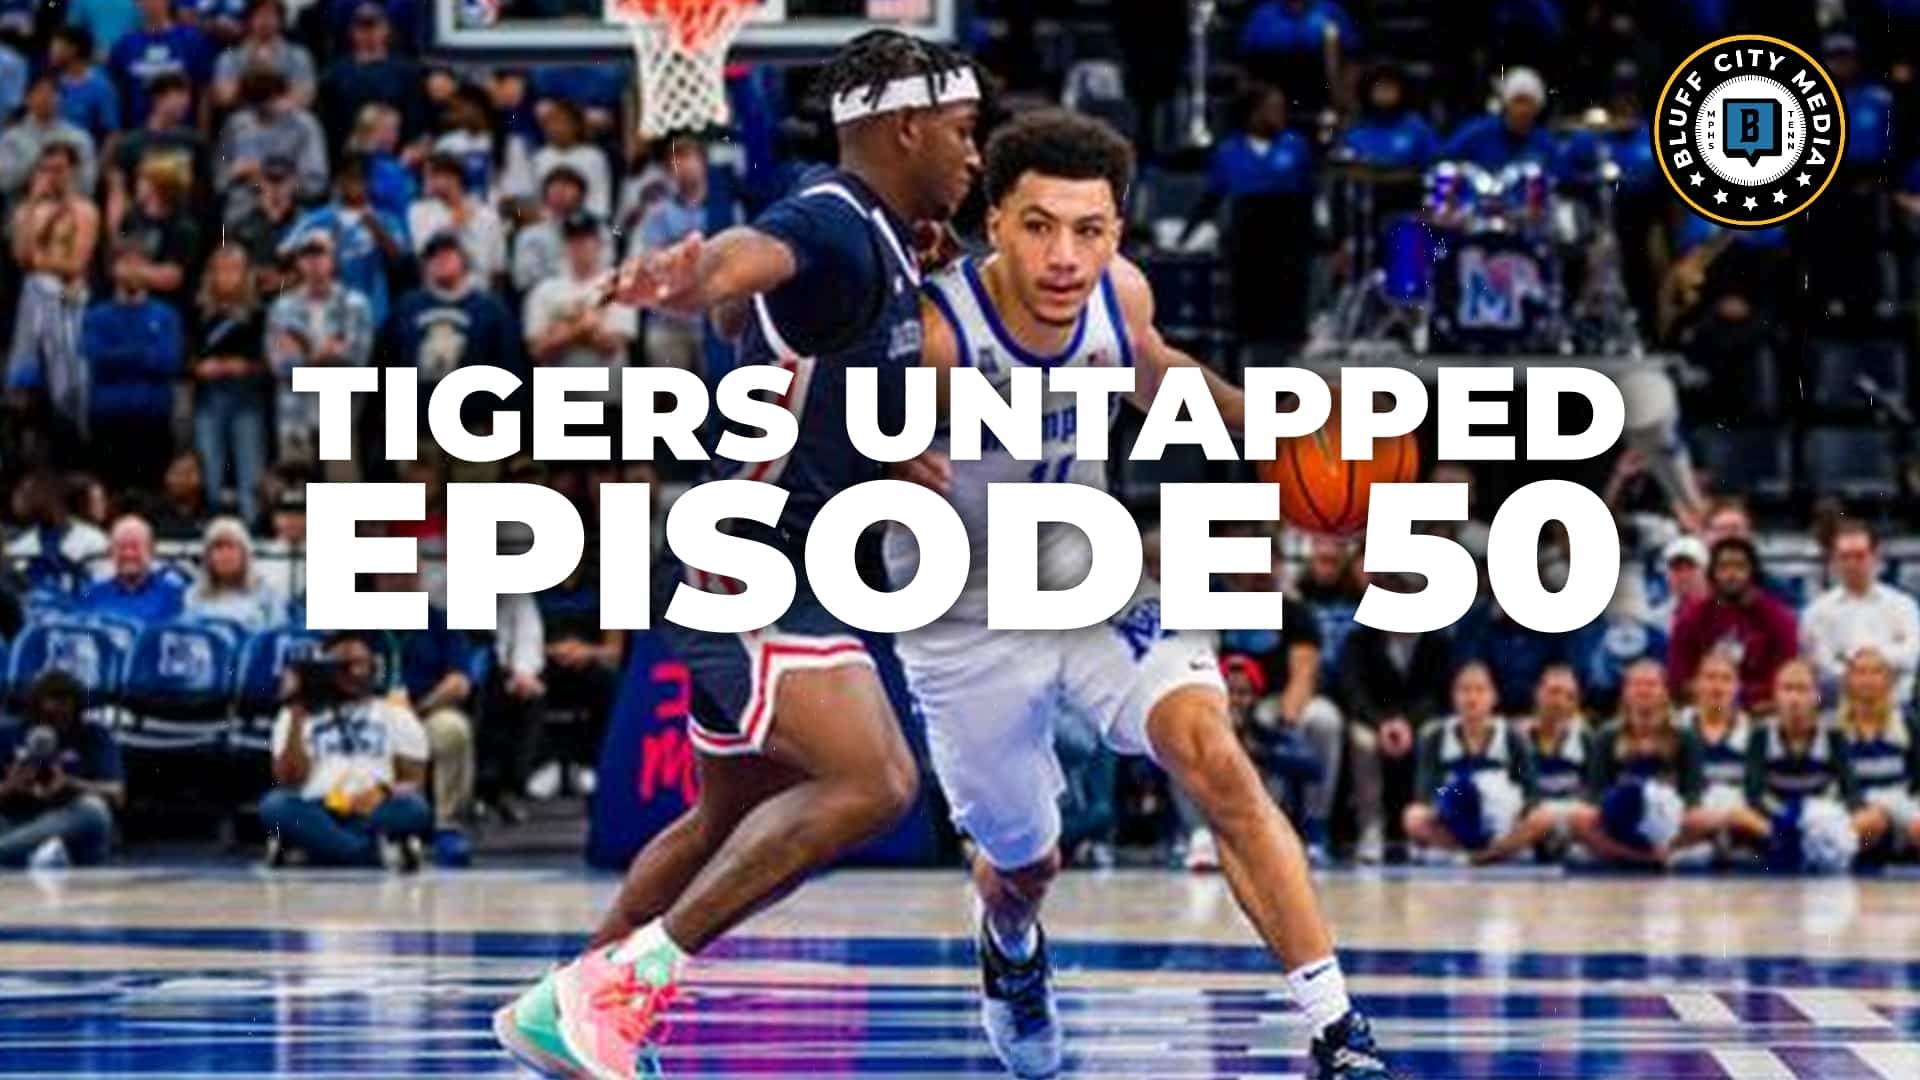 Featured image for “Tigers Untapped Ep 50: A Beatdown in Columbia; Matchup vs SMU”